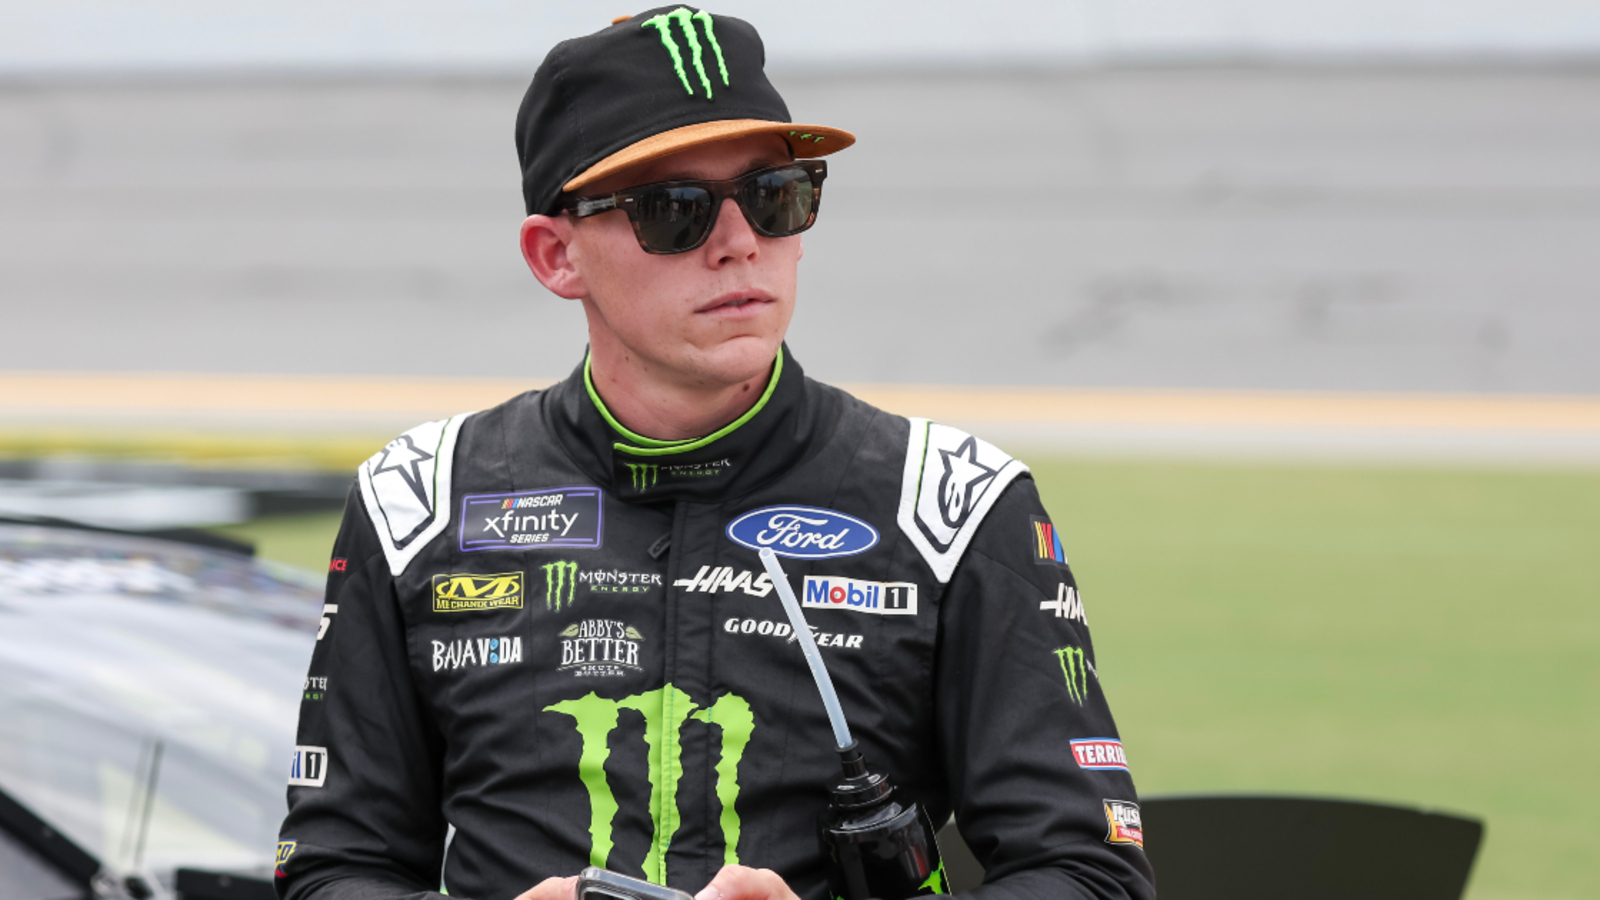 Riley Herbst to drive No. 15 car in select races with Rick Ware Racing, including Daytona 500